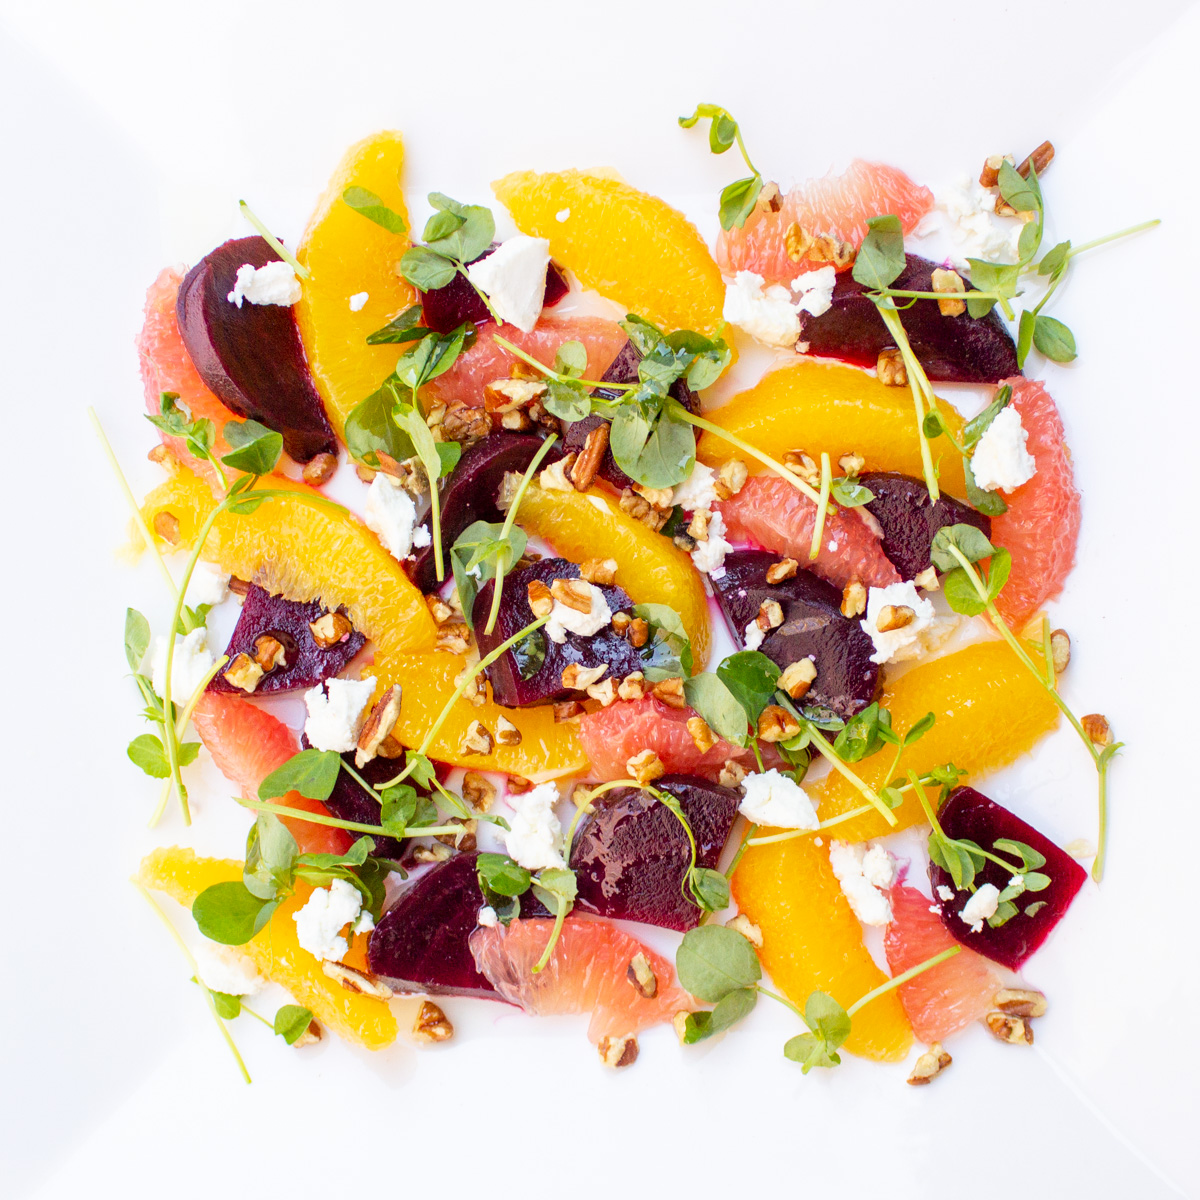 beetroot salad with oranges on white plate